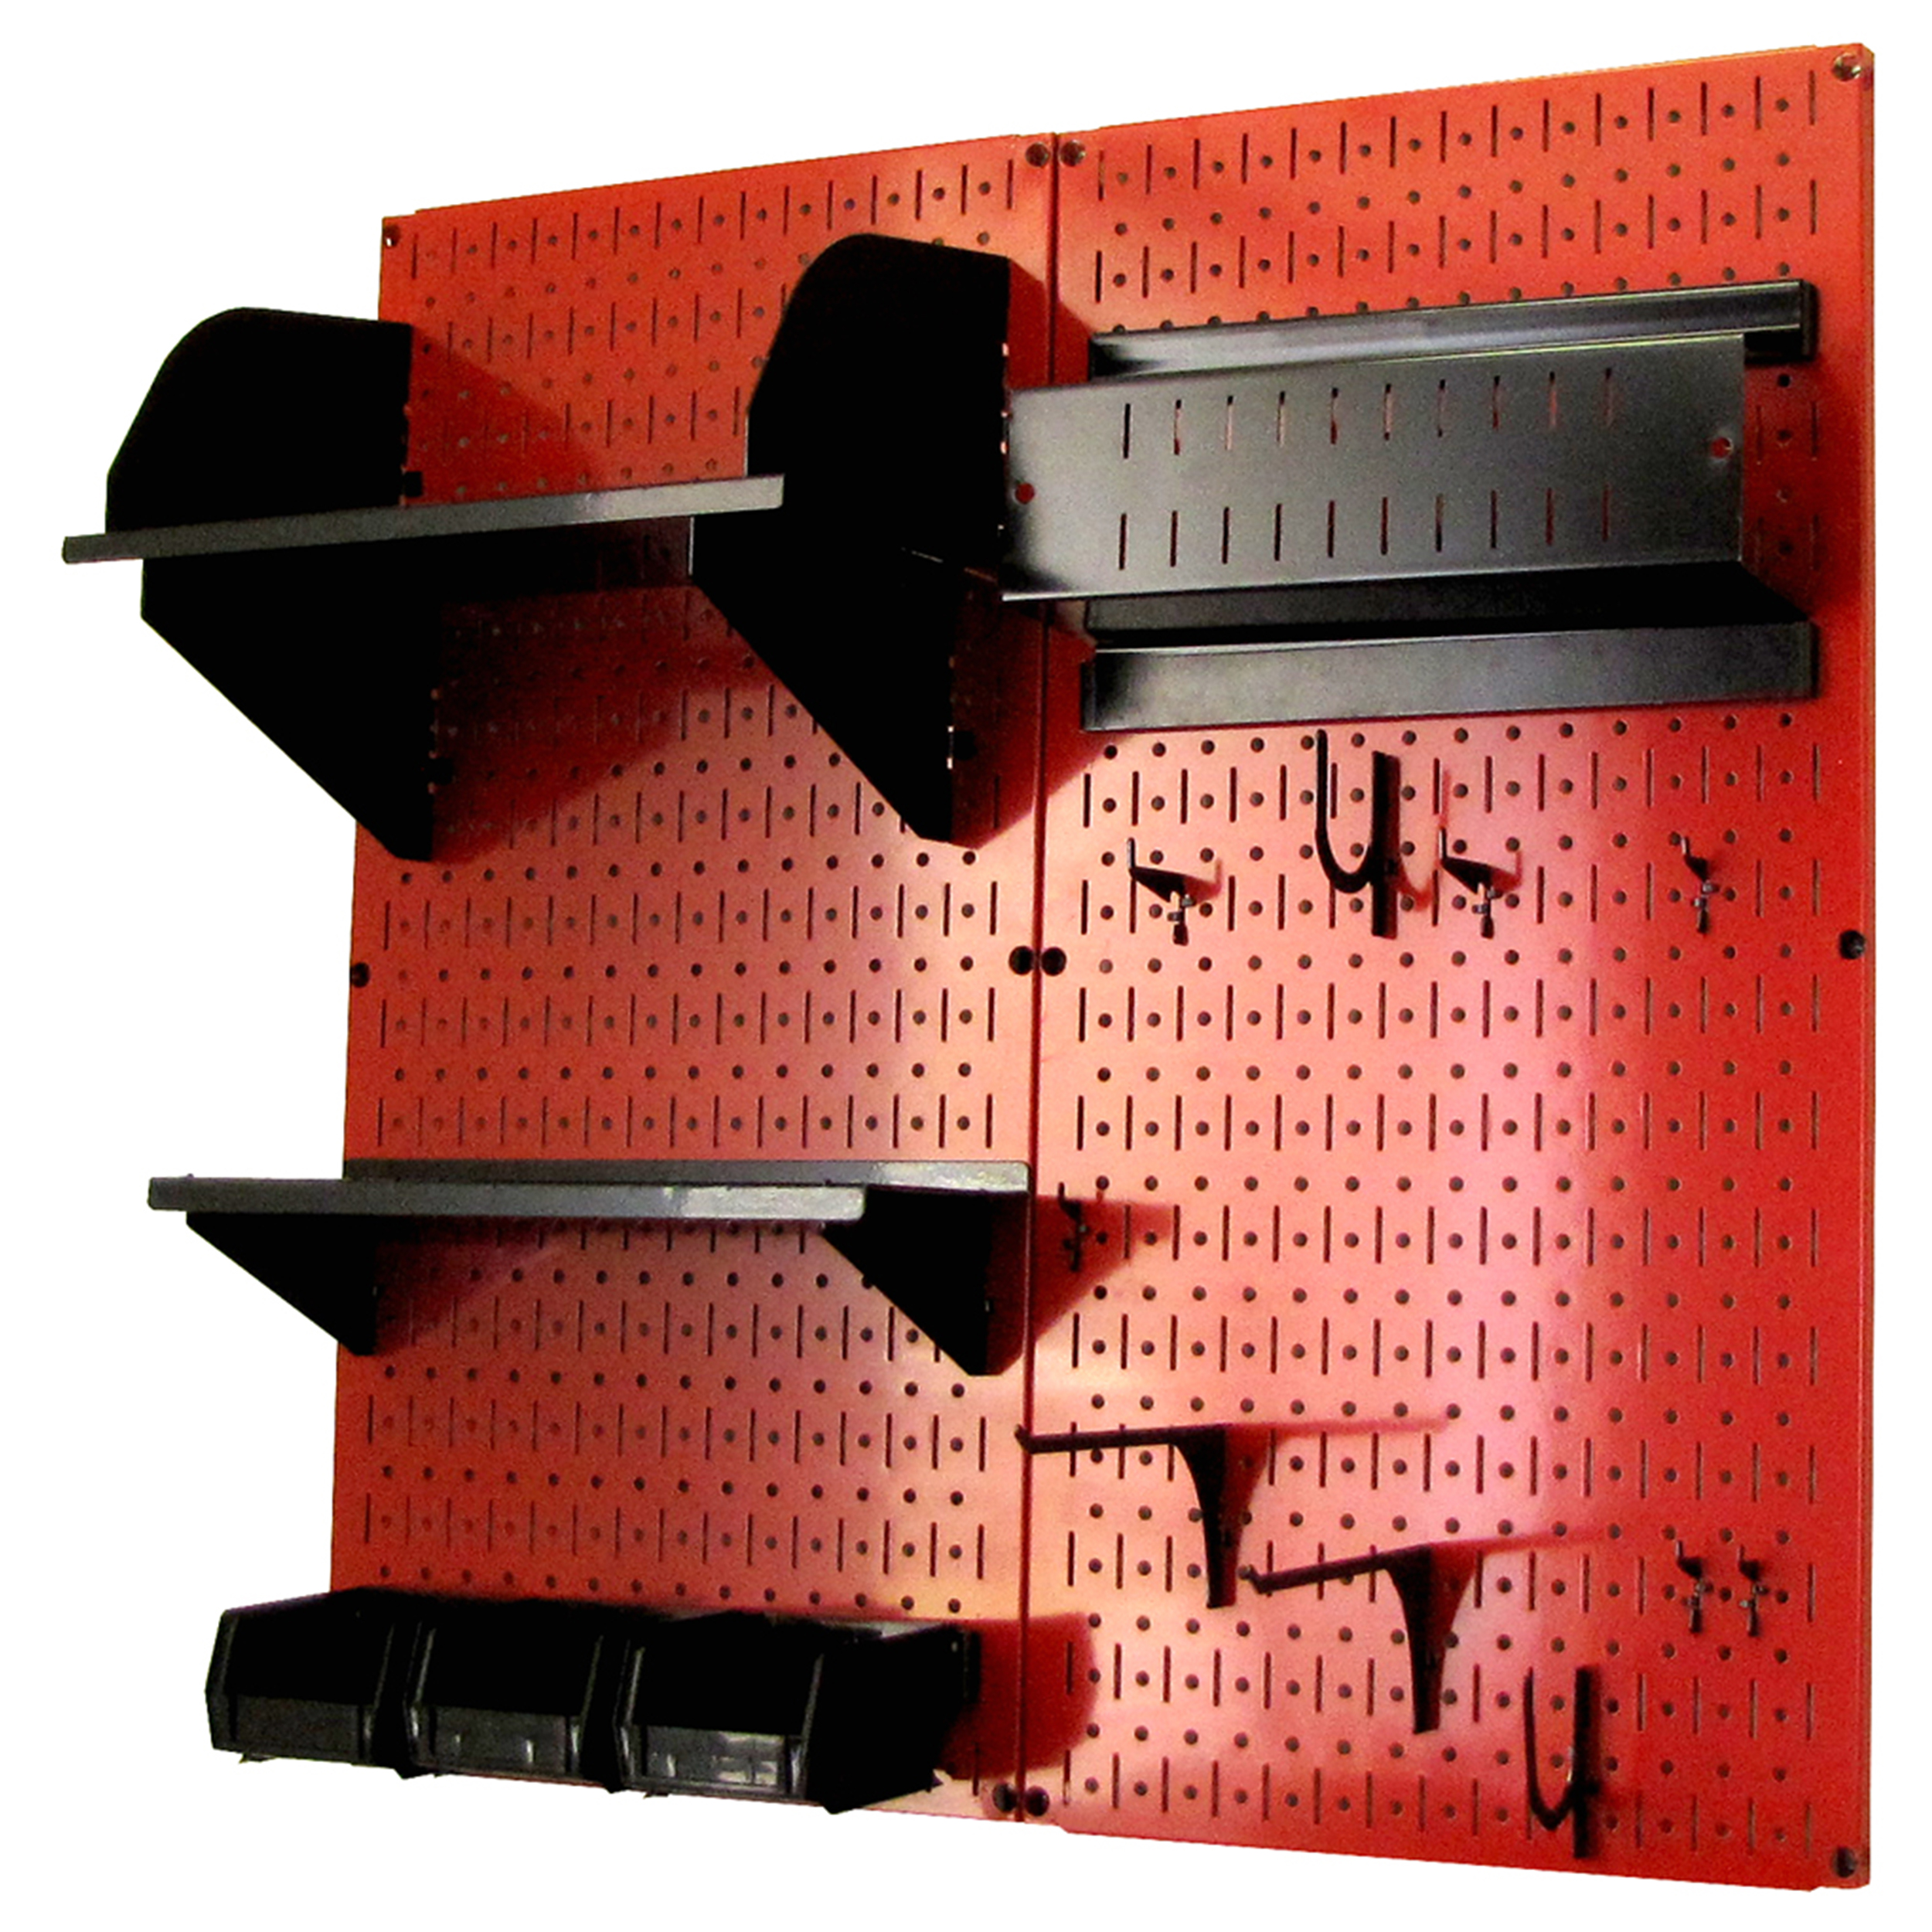 Pegboard Hobby Craft Pegboard Organizer Storage Kit With Red Pegboard And Black Accessories